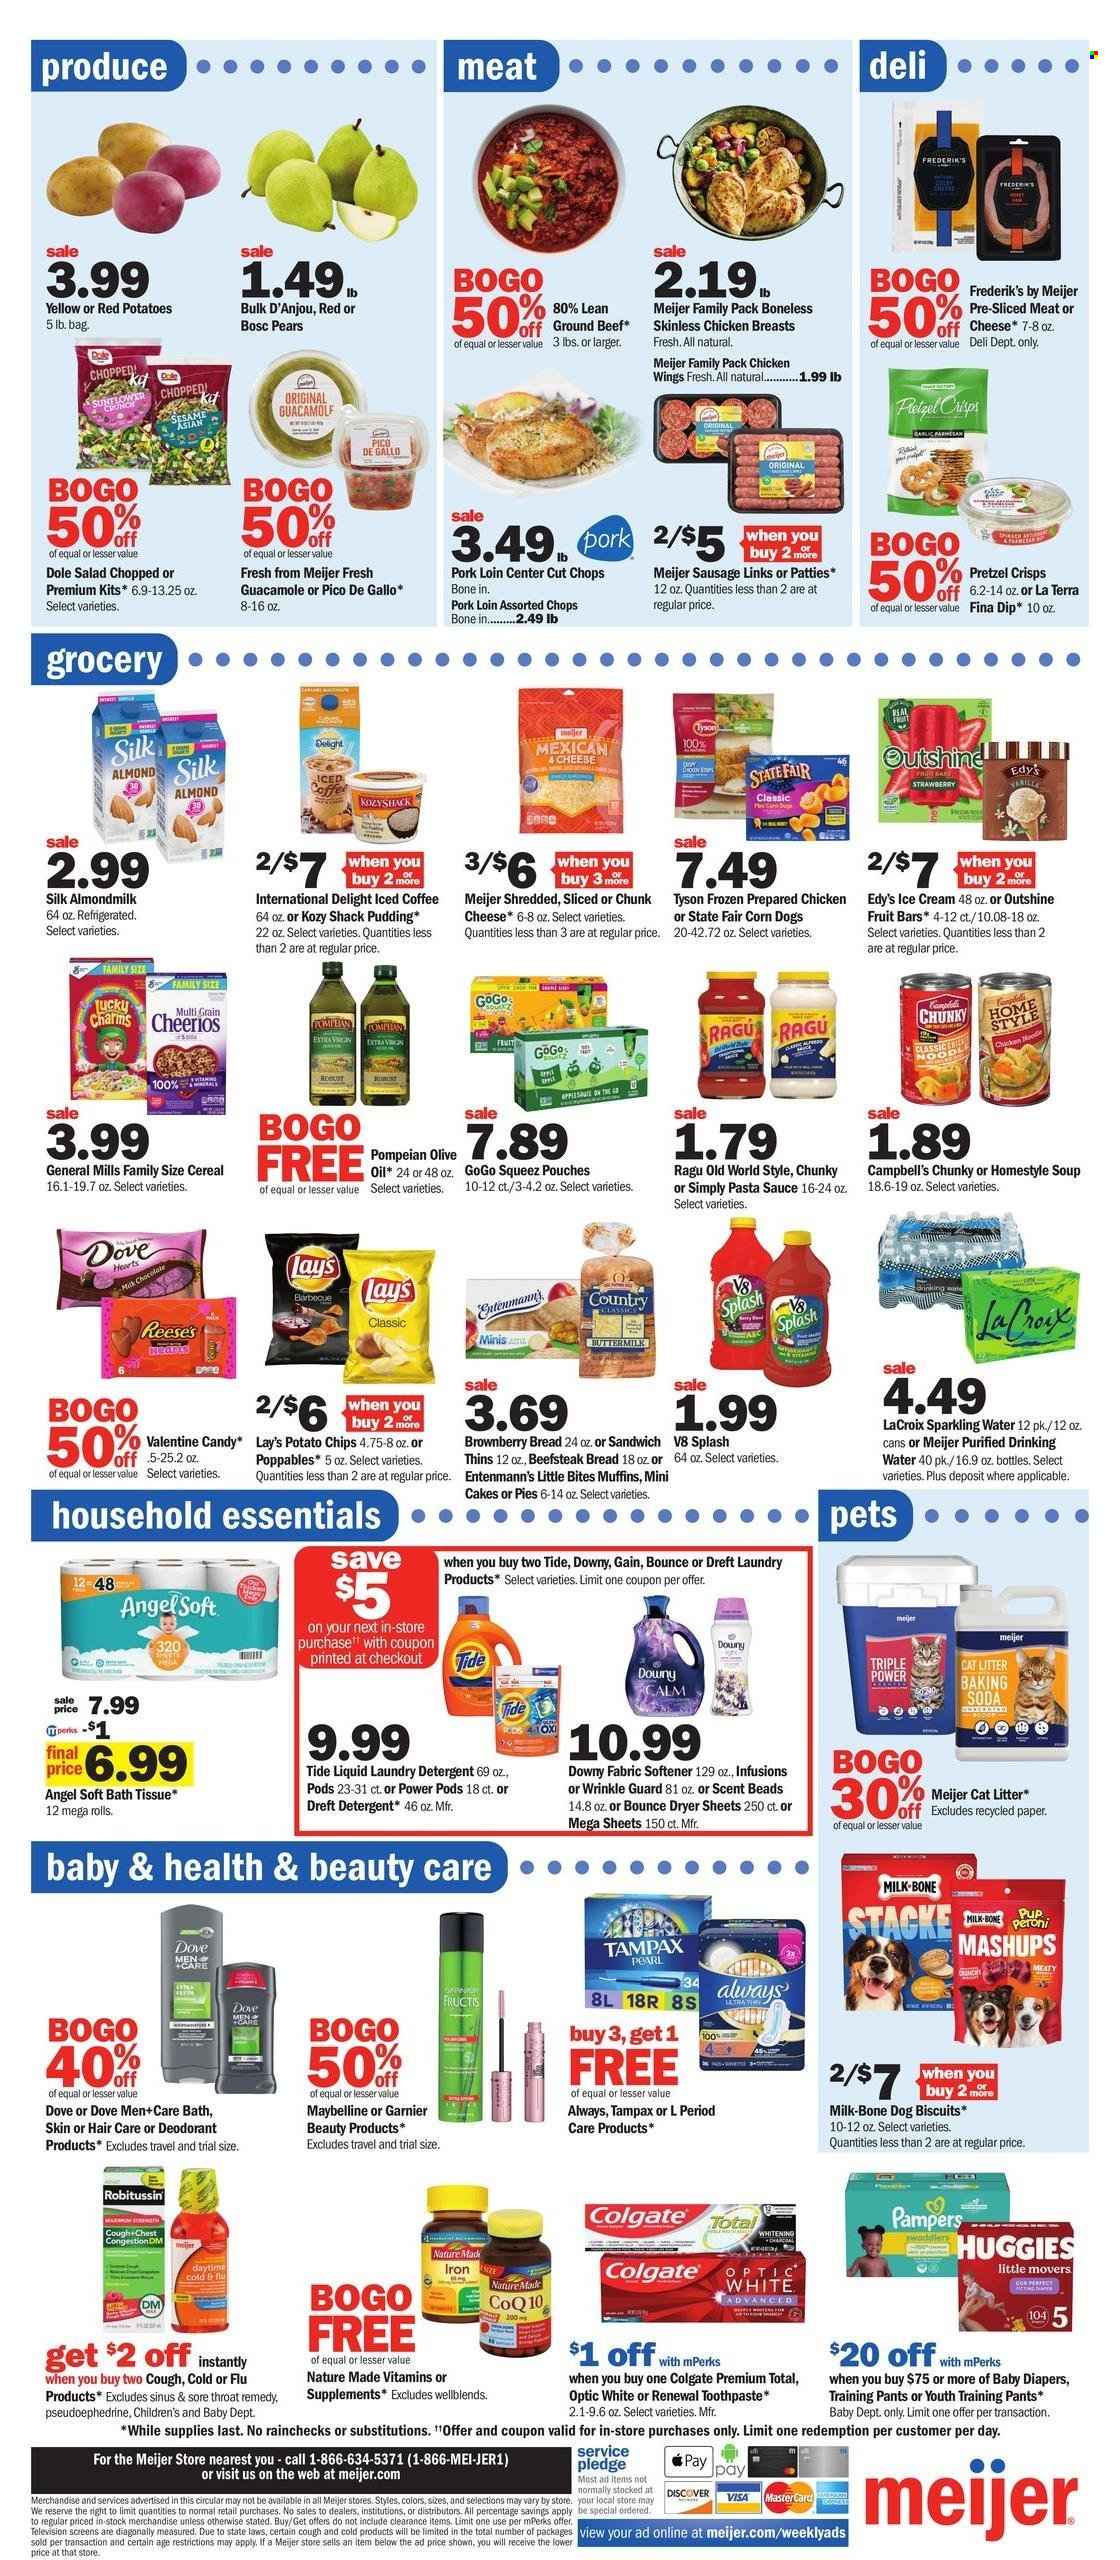 thumbnail - Meijer Flyer - 01/22/2023 - 01/28/2023 - Sales products - bread, cake, muffin, Entenmann's, salad, Dole, red potatoes, pears, Campbell's, pasta sauce, sandwich, soup, sauce, noodles, sausage, guacamole, chunk cheese, pudding, almond milk, buttermilk, dip, ice cream, Reese's, chicken wings, Dove, milk chocolate, Little Bites, potato chips, Lay’s, Thins, pretzel crisps, bicarbonate of soda, cereals, Cheerios, ragu, extra virgin olive oil, oil, sparkling water, iced coffee, Peroni, chicken breasts, beef meat, ground beef, pork loin, pork meat, Huggies, Pampers, pants, nappies, baby pants, bath tissue, detergent, Gain, Pledge, Tide, fabric softener, laundry detergent, dryer sheets, Downy Laundry, Colgate, toothpaste, Tampax, Garnier, Fructis, anti-perspirant, deodorant, cat litter, animal treats, dog food, dog biscuits, sunflower, Nature Made, Robitussin, Maybelline. Page 12.